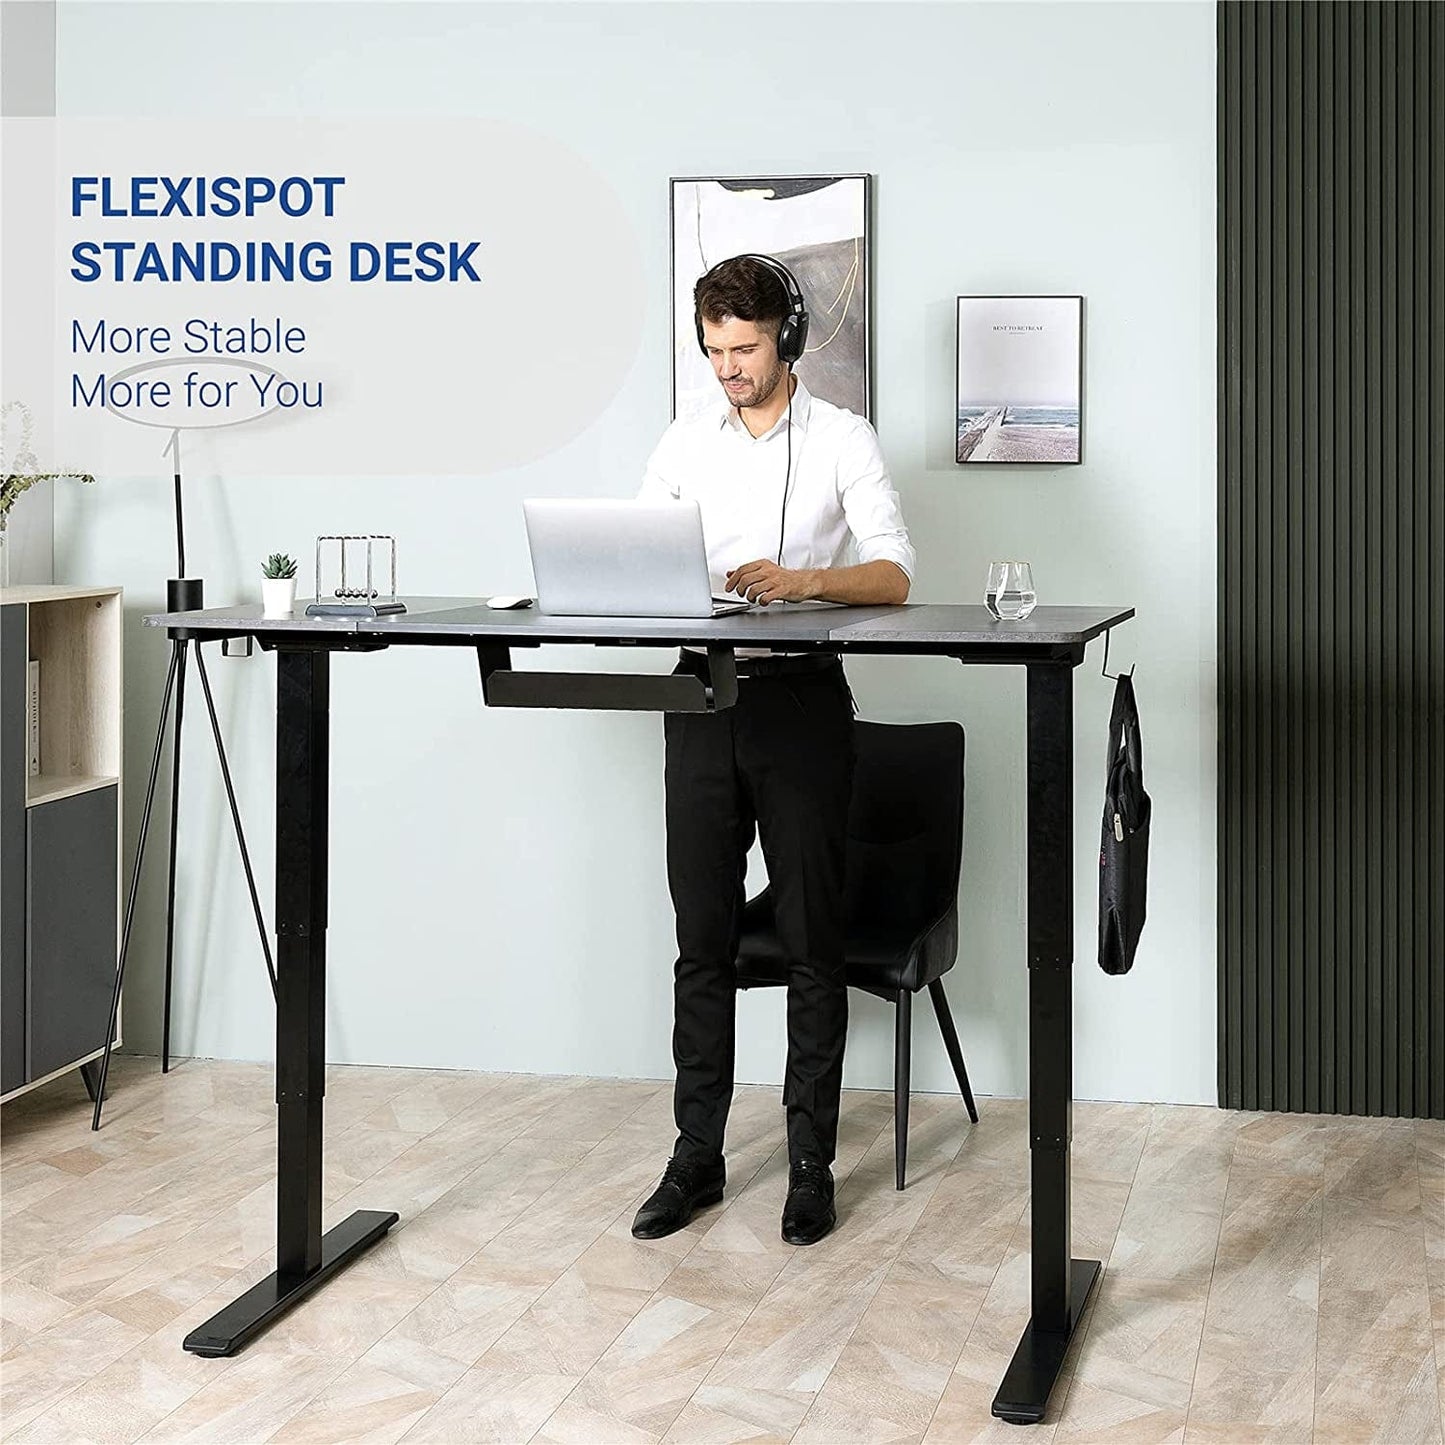 StandUp Desk Depot Black Frame  Black/Greystone Top / 63"X30" Classic Electric Standing Desk 63"X30" Inches Dual Motor 3 Stages Height Adjustable Desk Stand up Desk USB Charging Port and Hooks Sit Stand Desk New